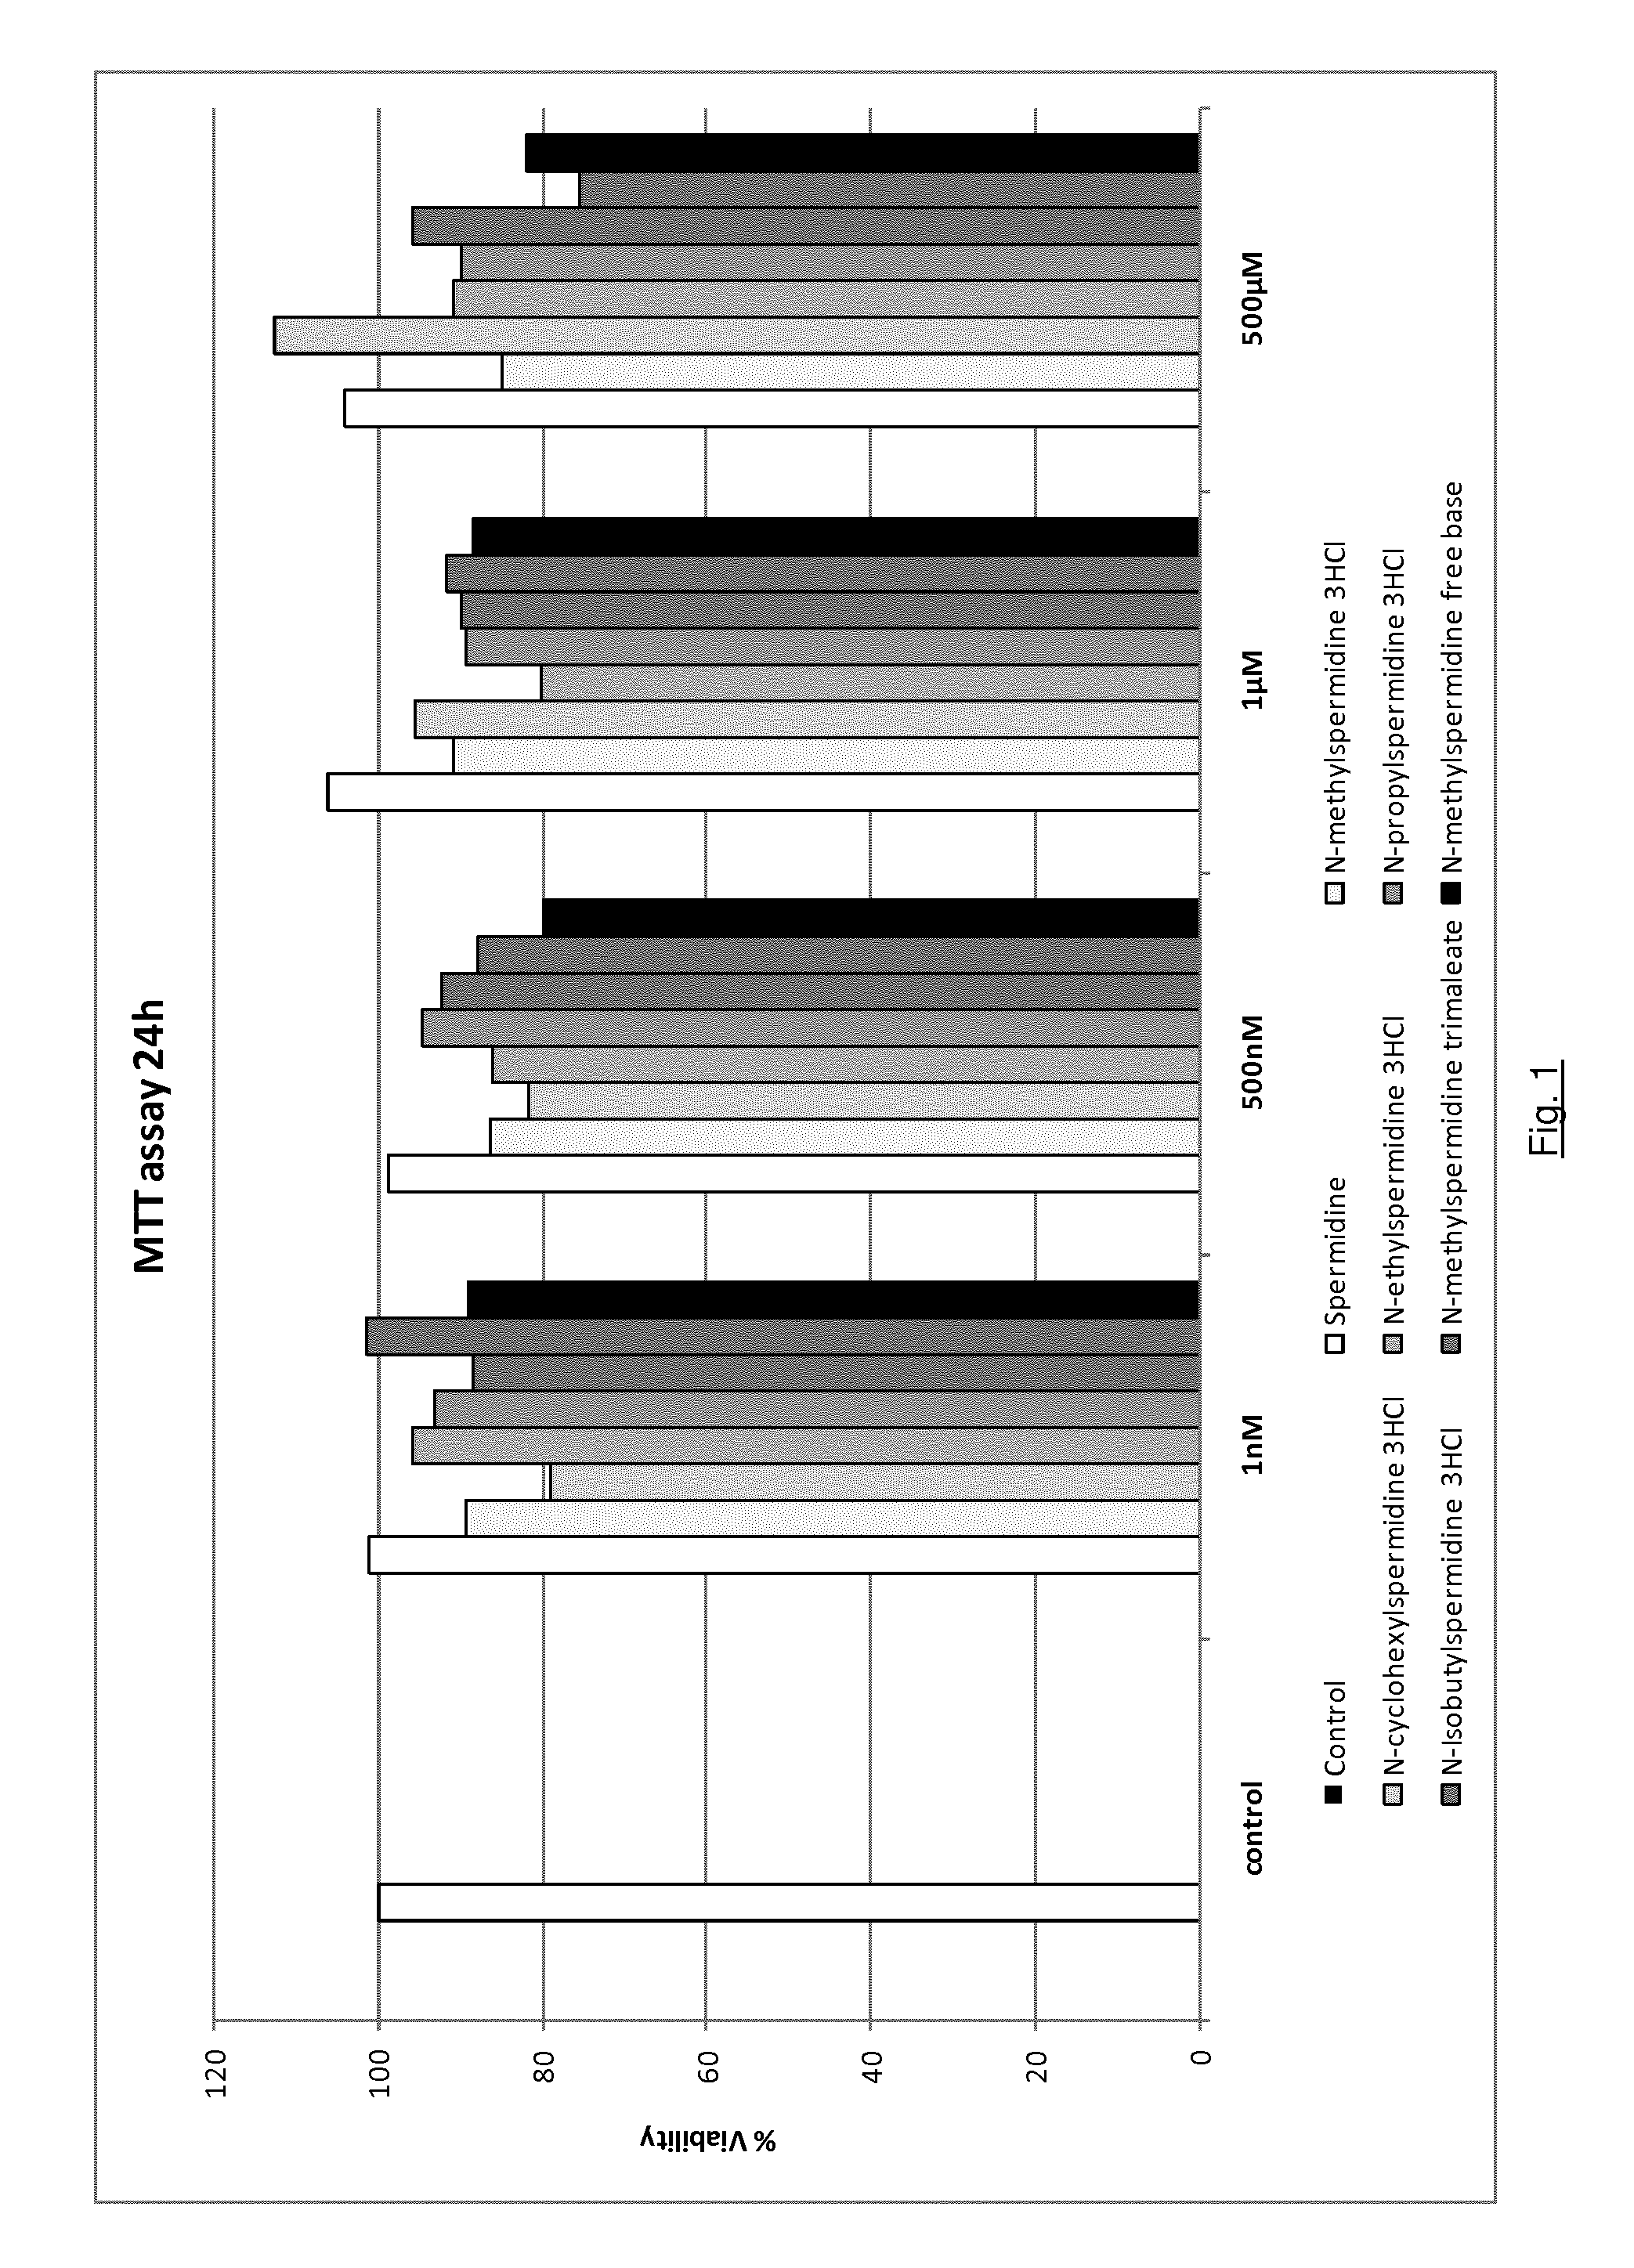 Pharmaceutical or cosmetic composition for treating alopecia